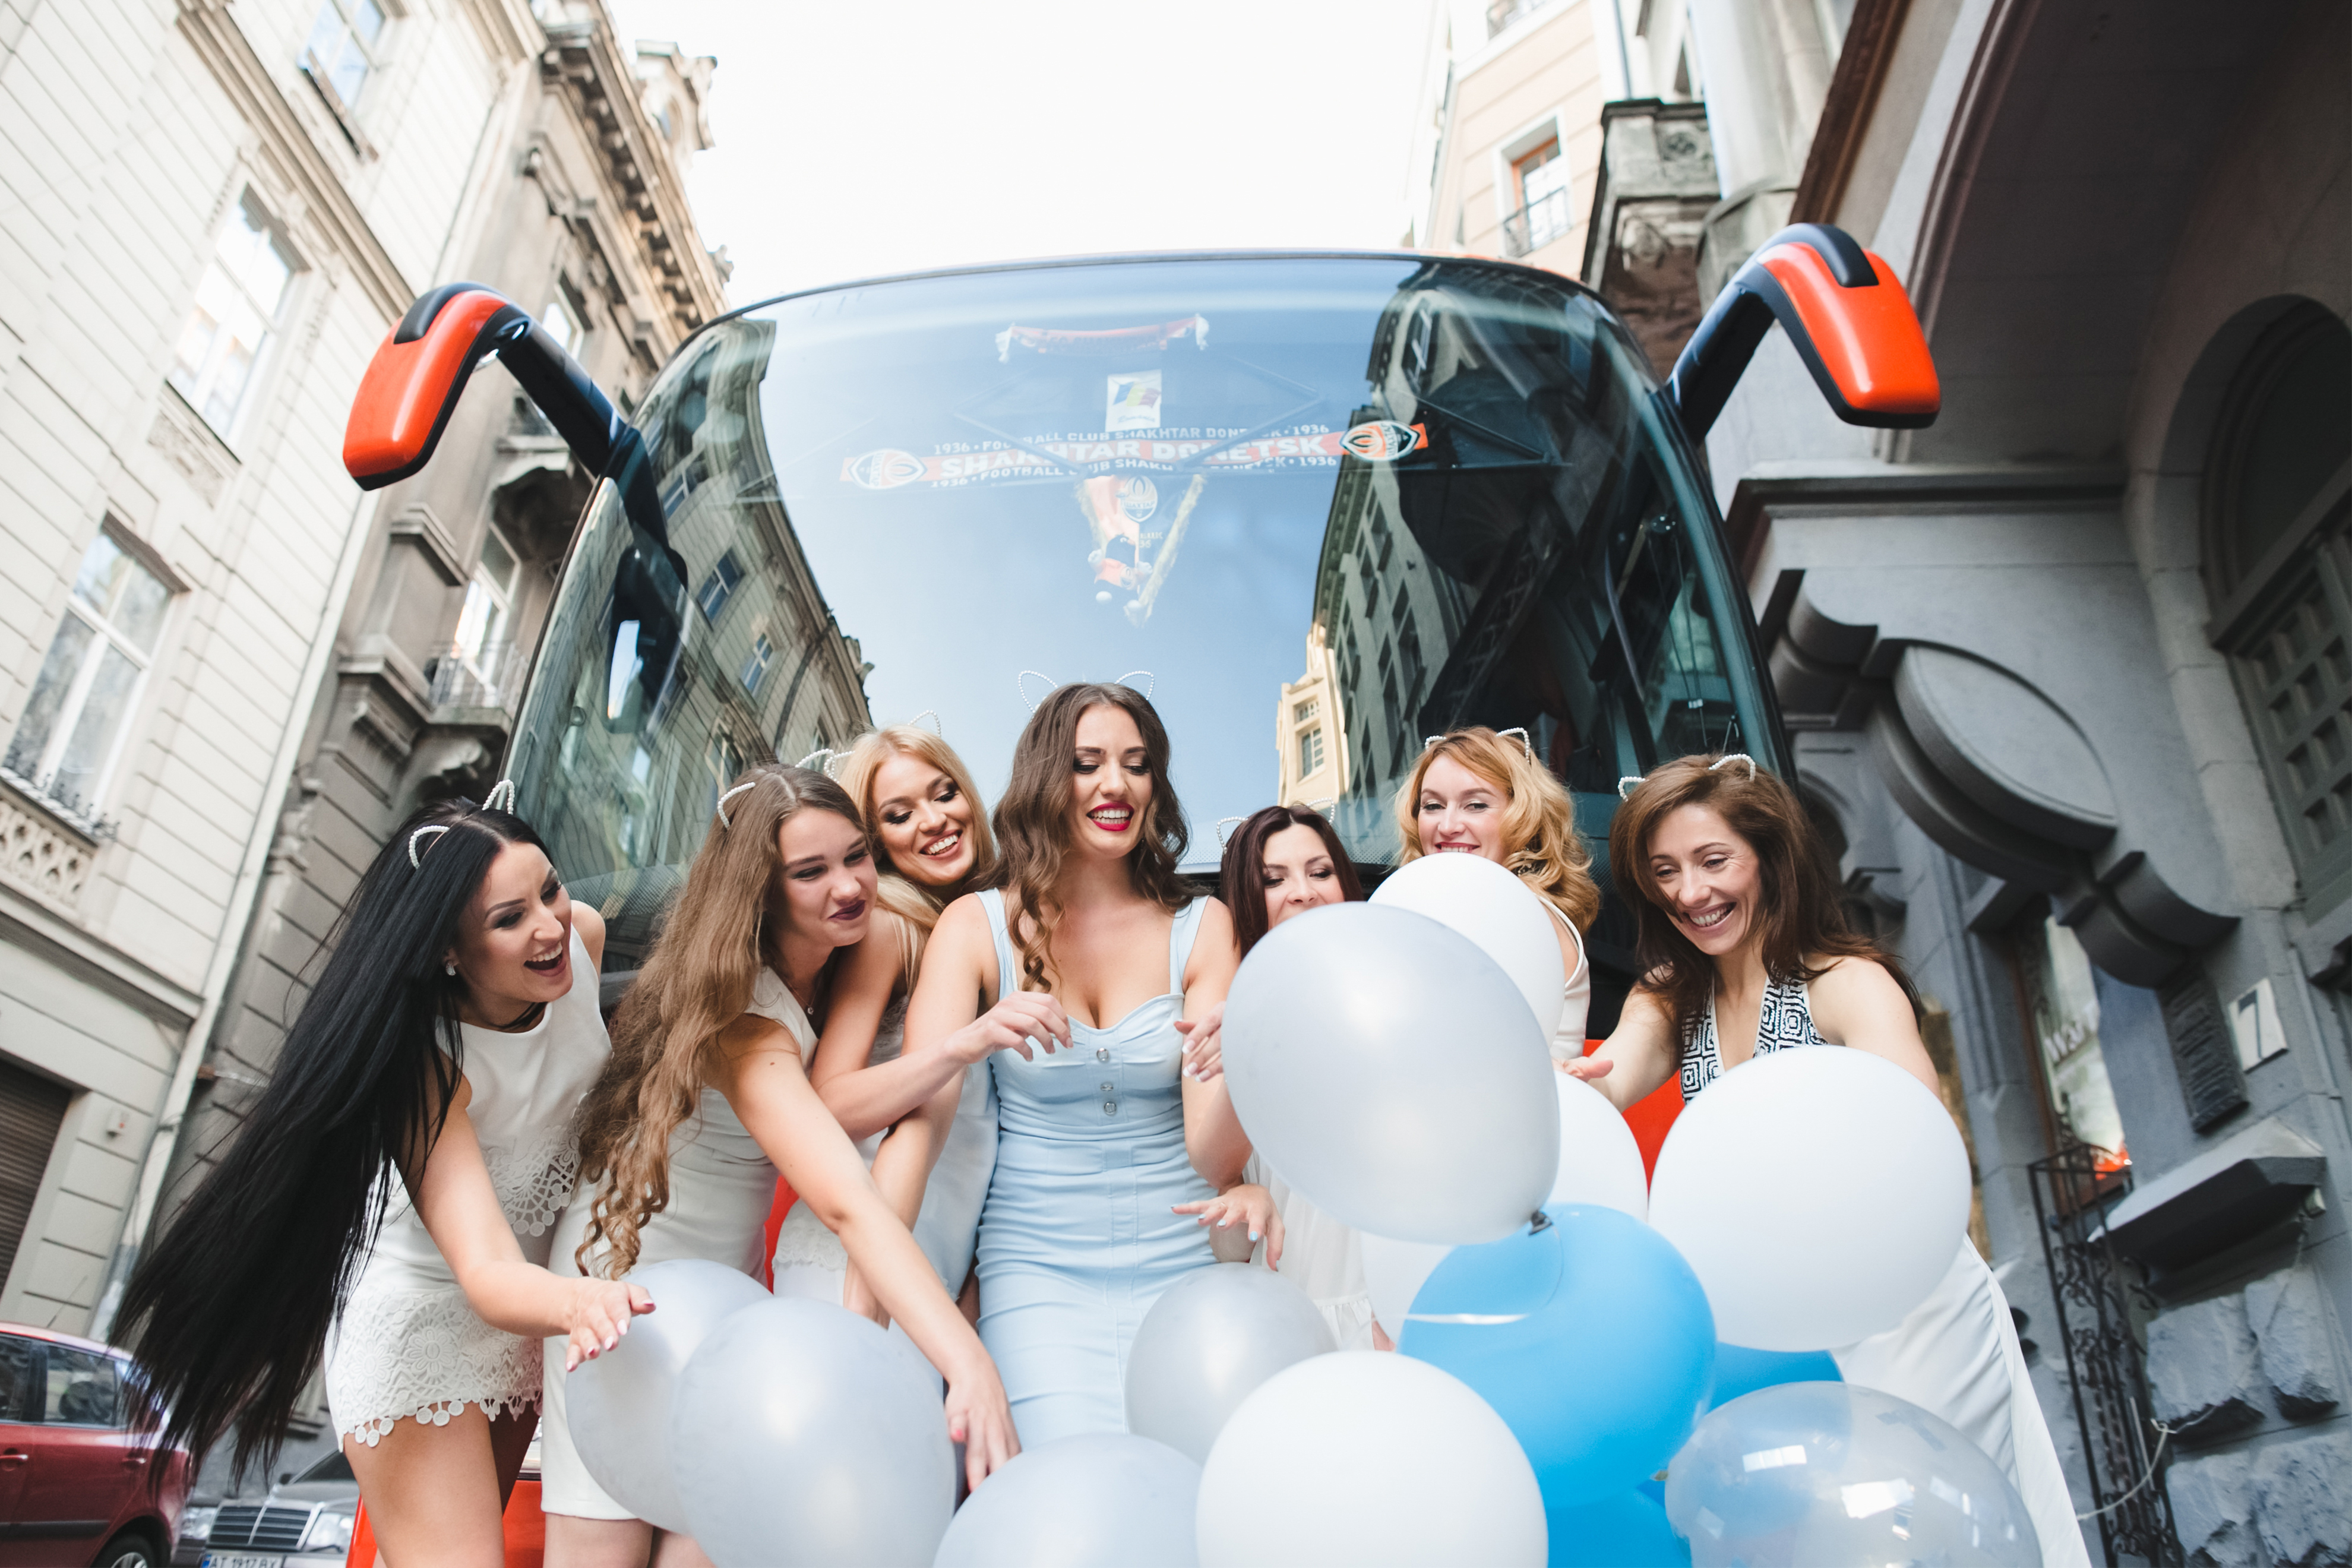 Bridal party in front of a limo bus